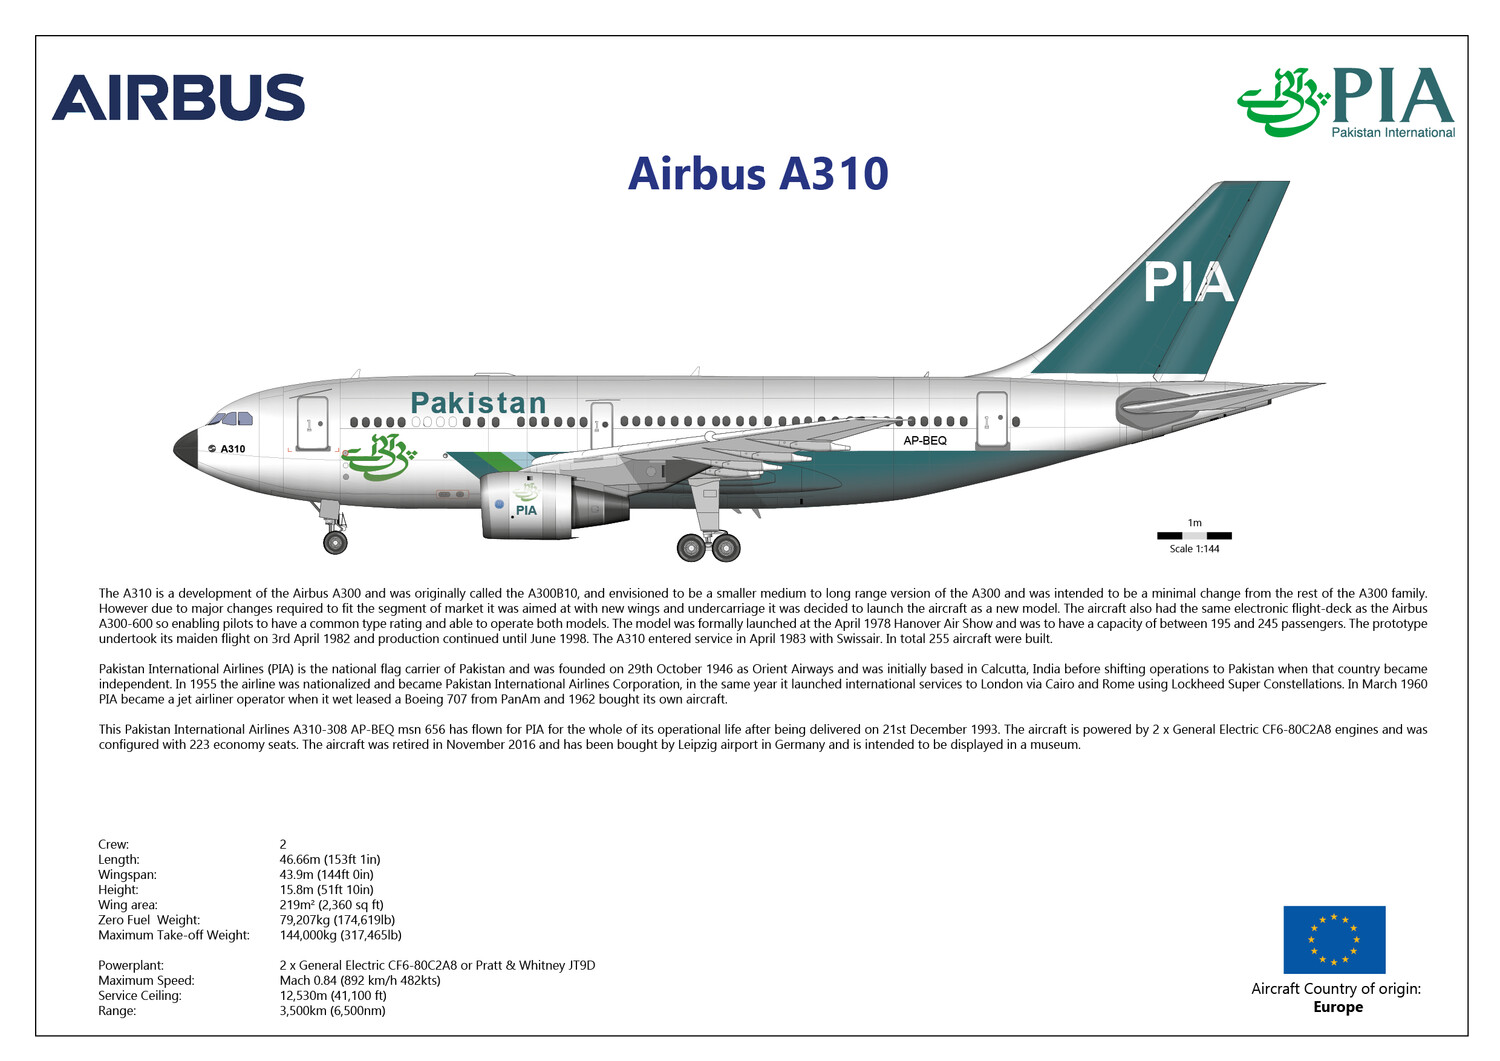 Airbus A310-300 of Pakistan International Airlines